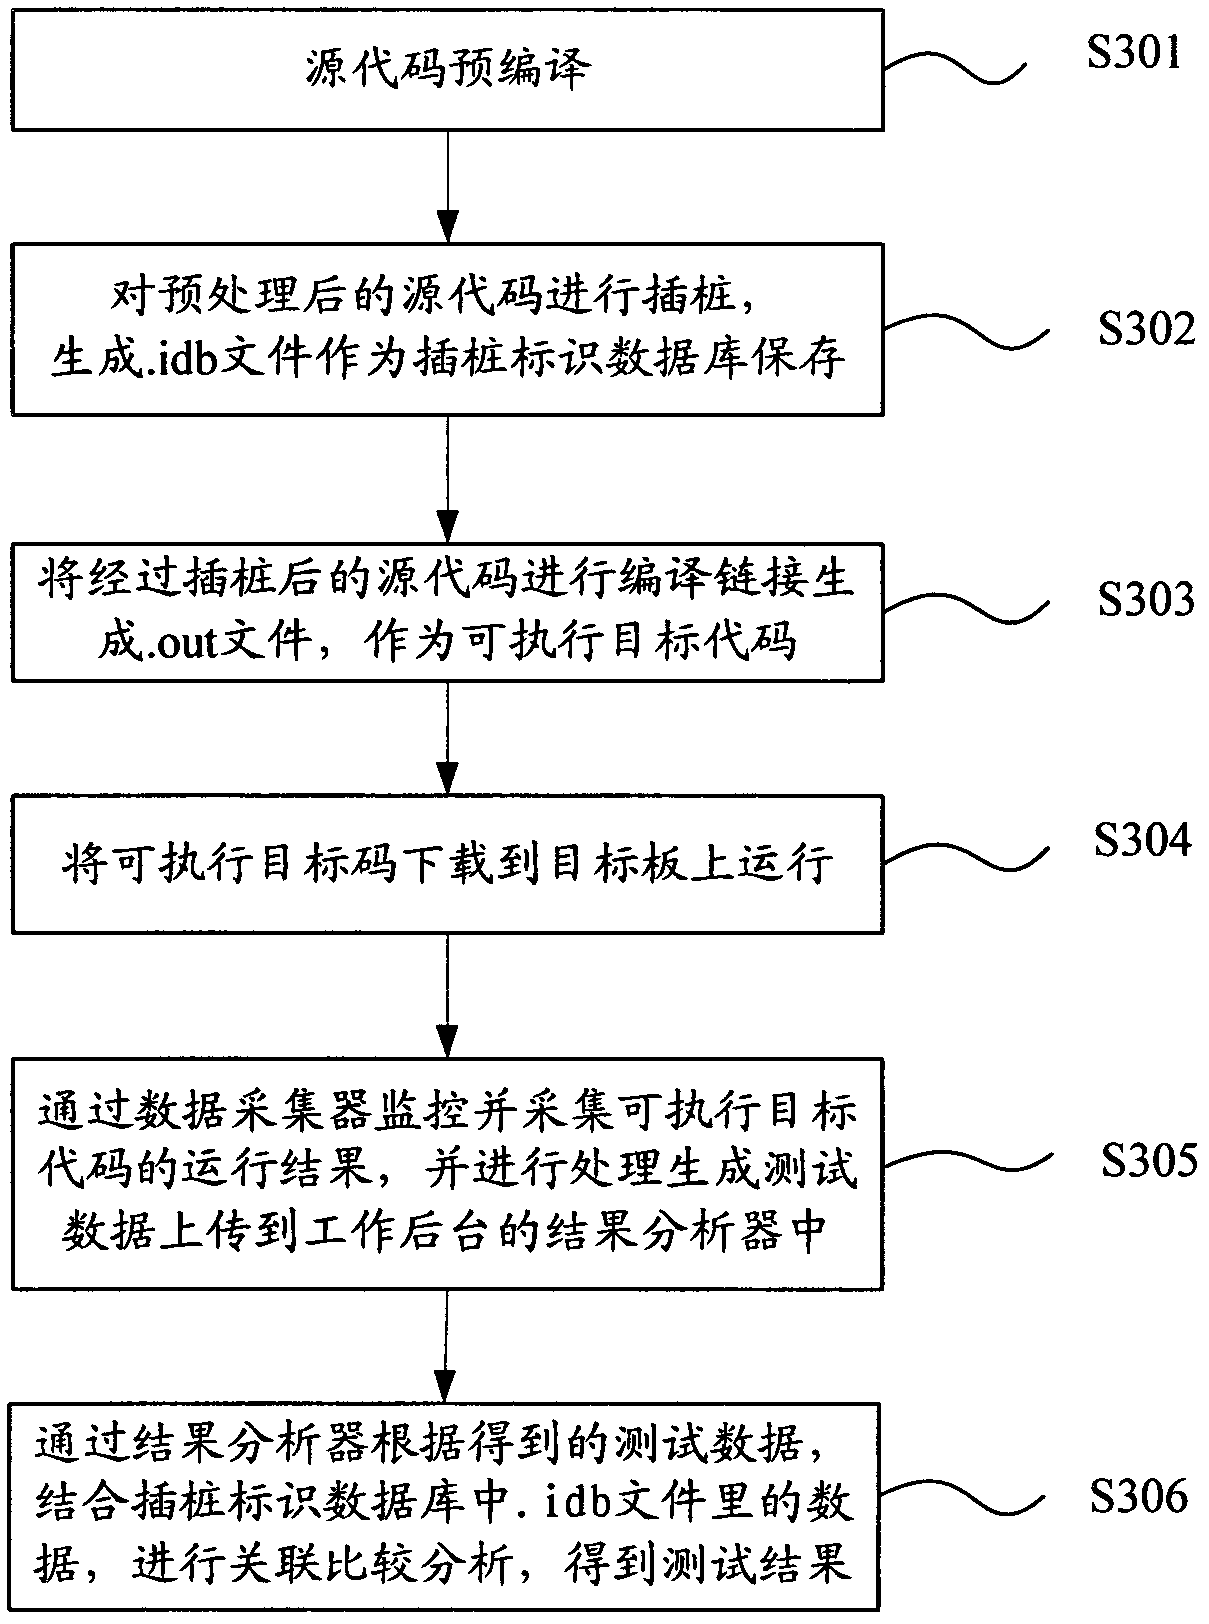 Test analysis system and method based on embedded software